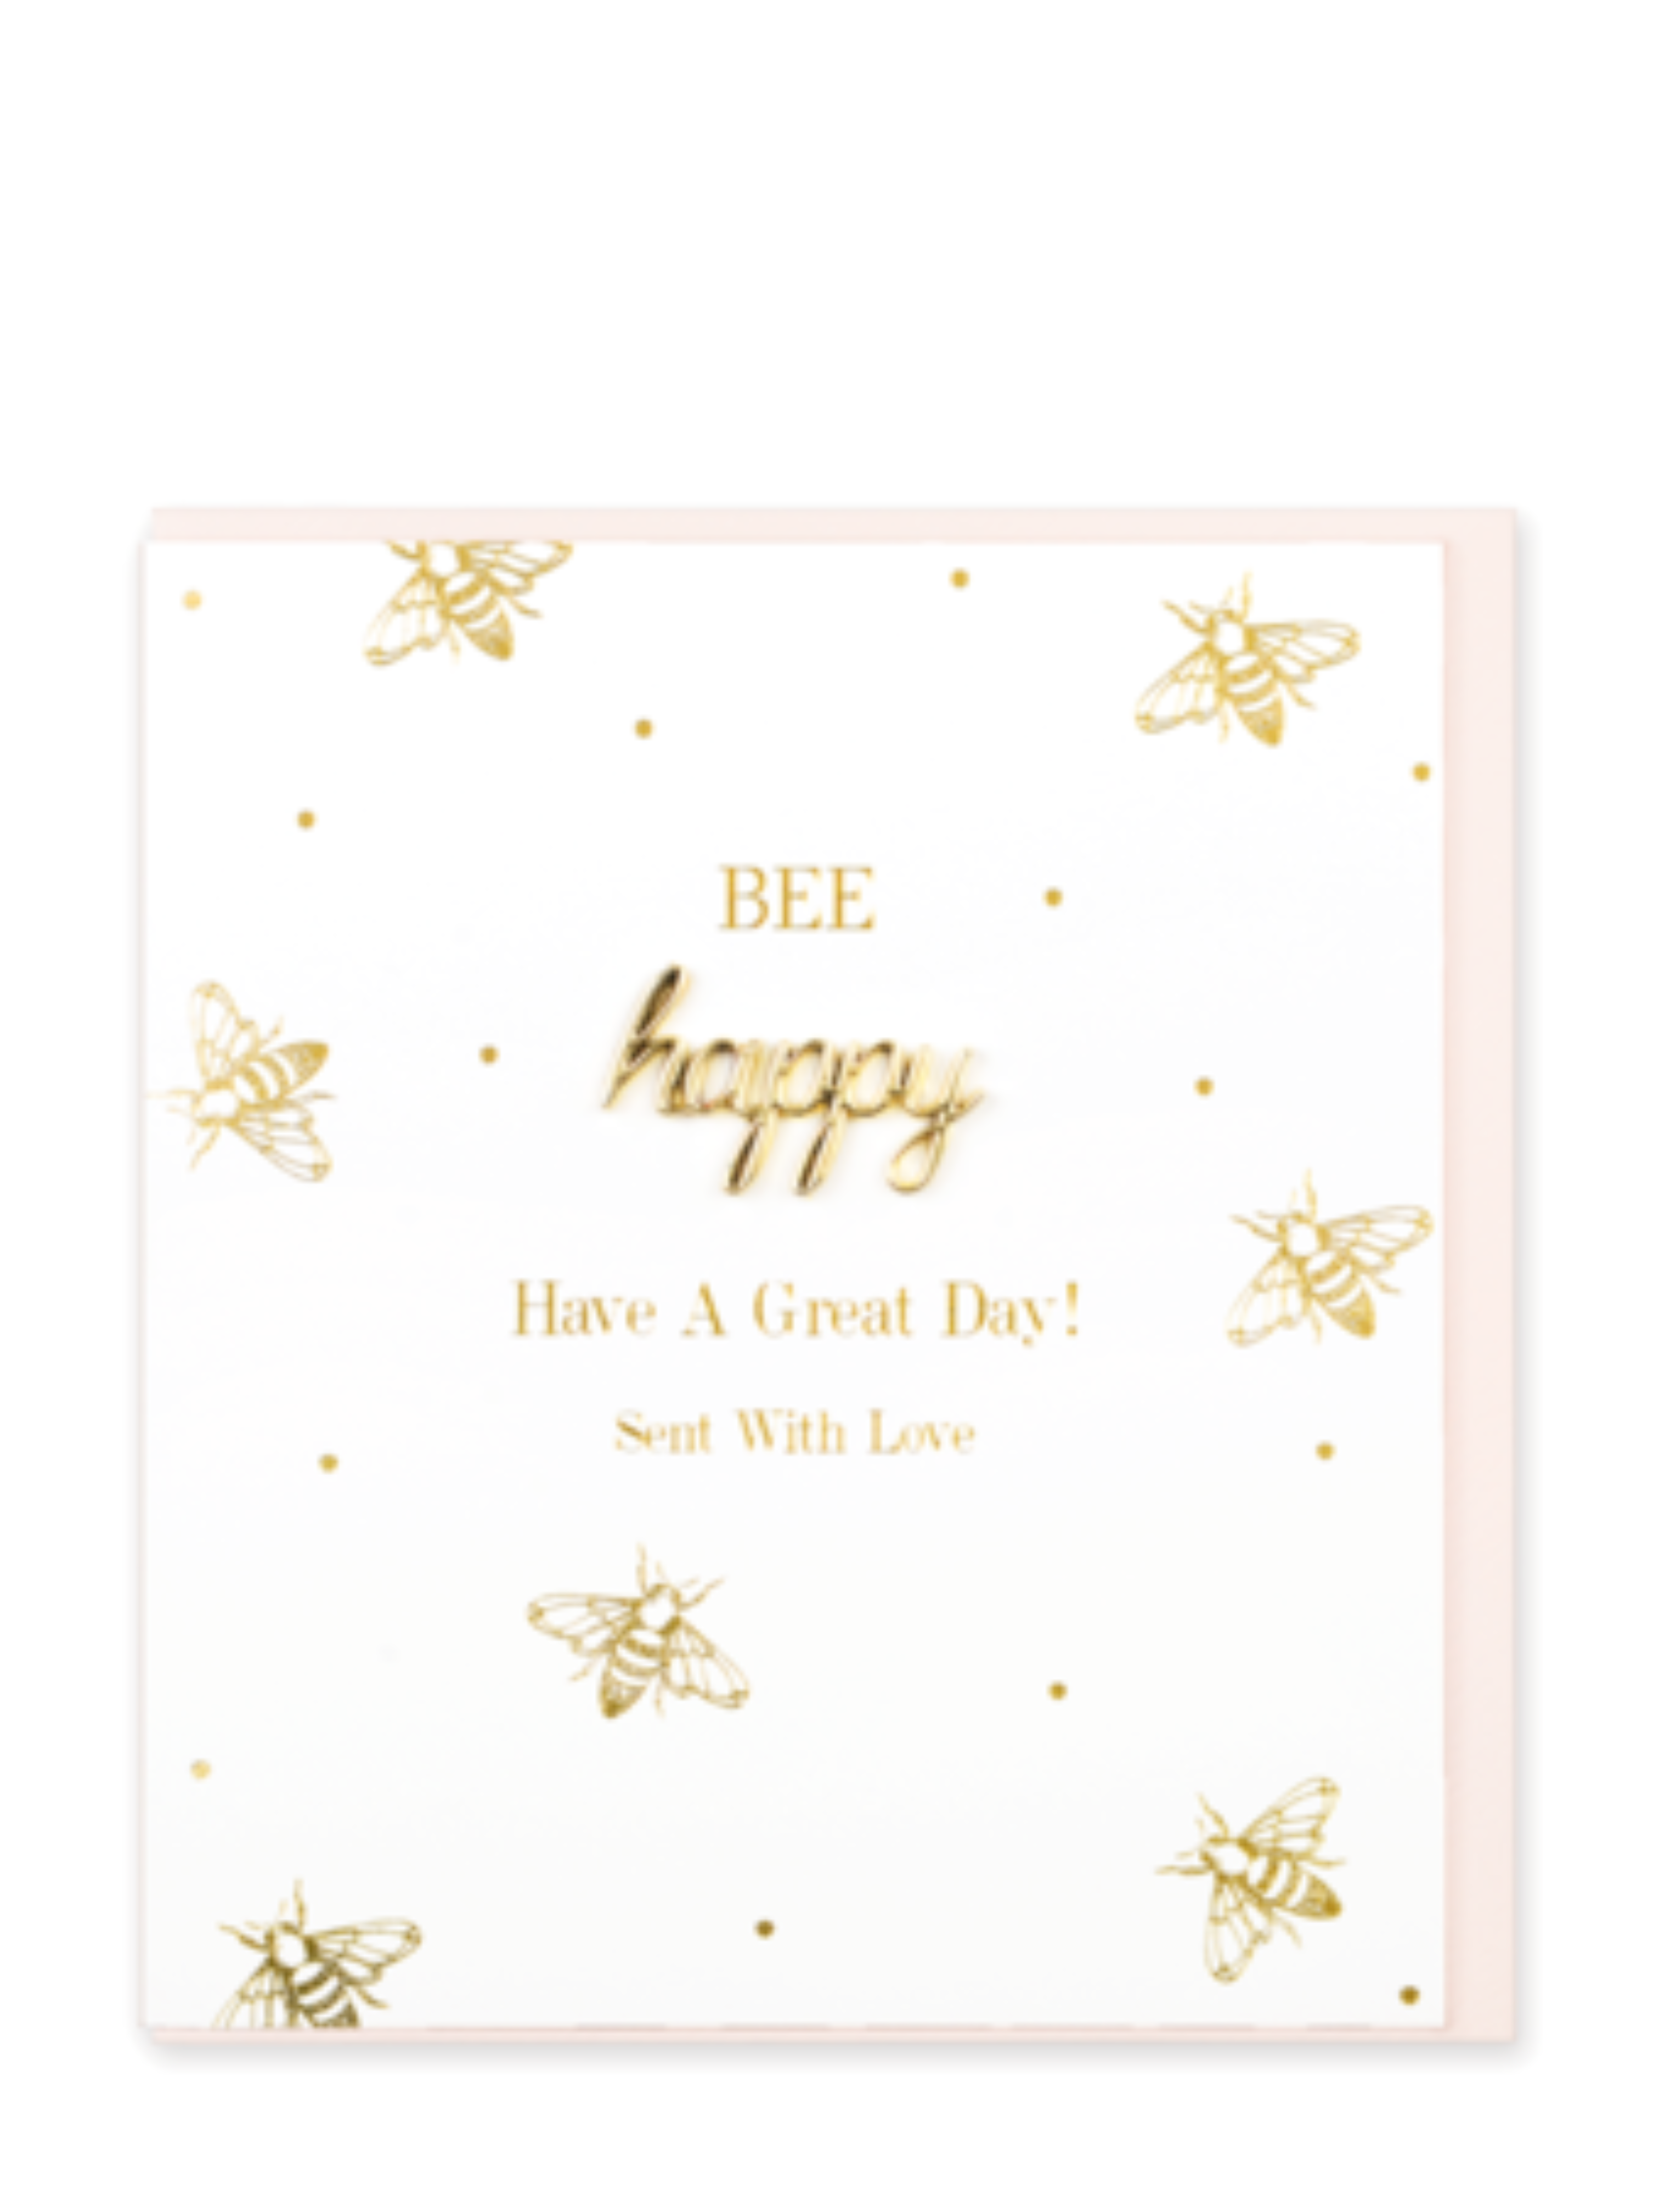 Bee Happy Have a Great Day Card